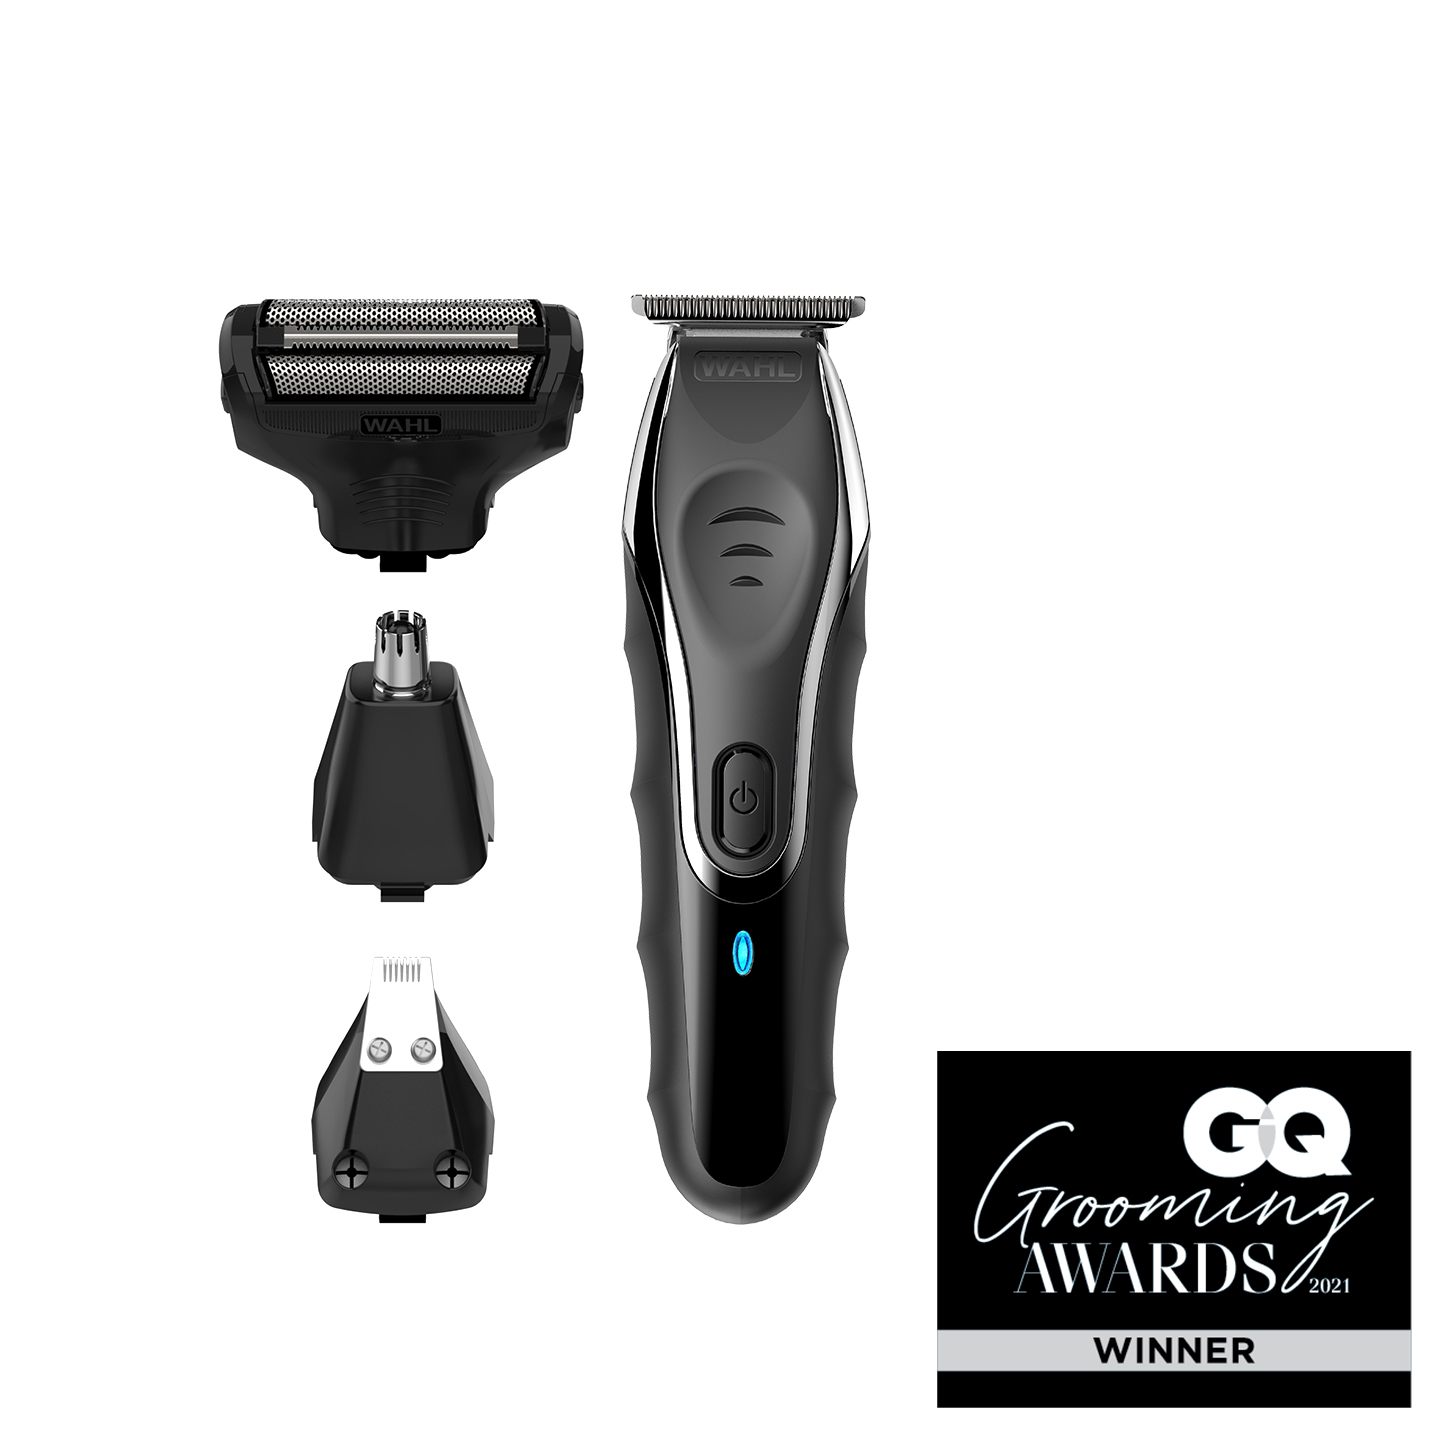 wahl aqua blade 20 in 1 review